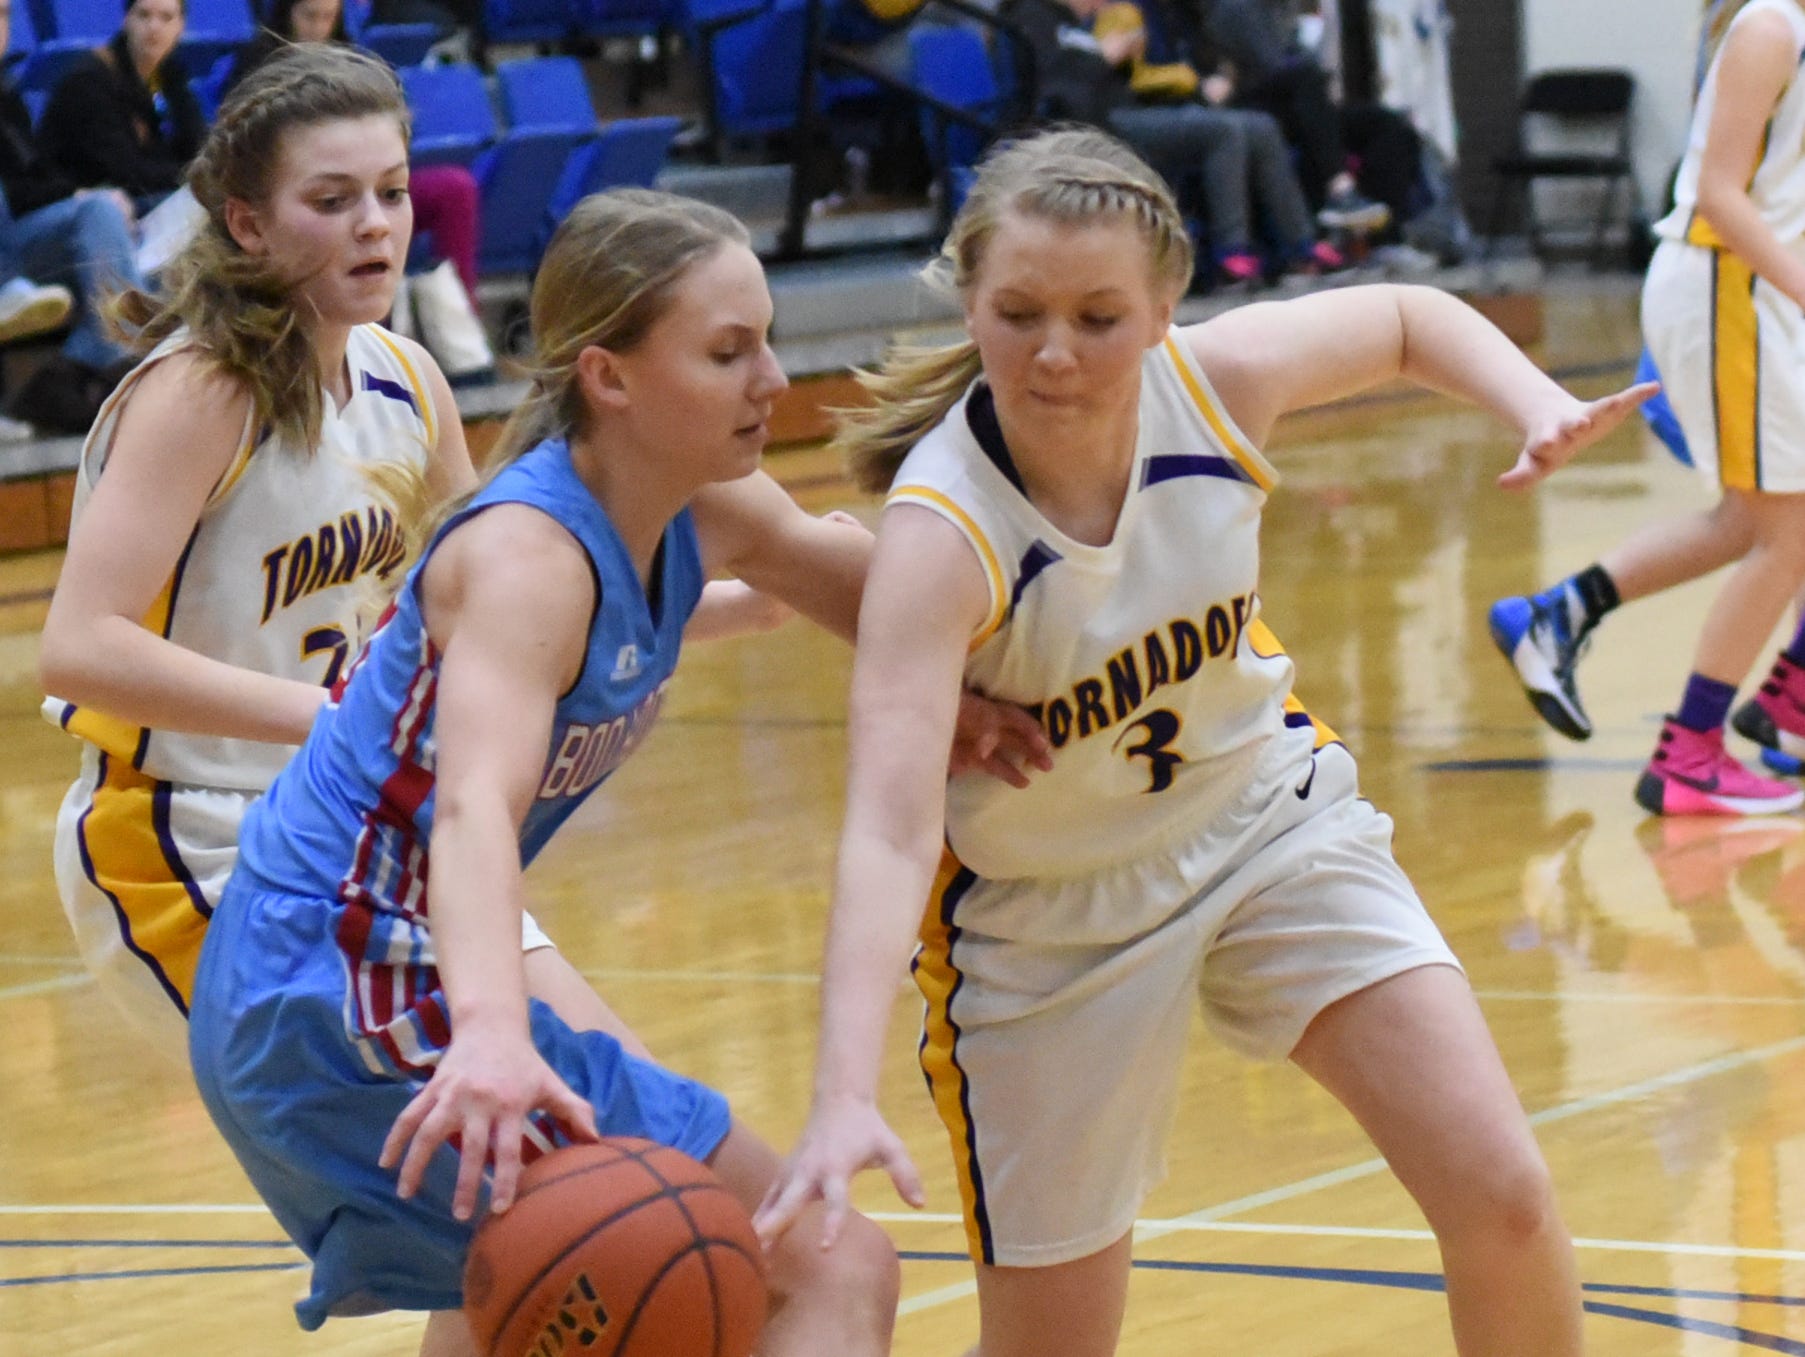 Centerville's Shannon O'Malley, right, steals the ball form Bon Homme's Sierra Mesman during their matchup in the Tri-Valley Conference girls' basketball Classic on Jan. 30.